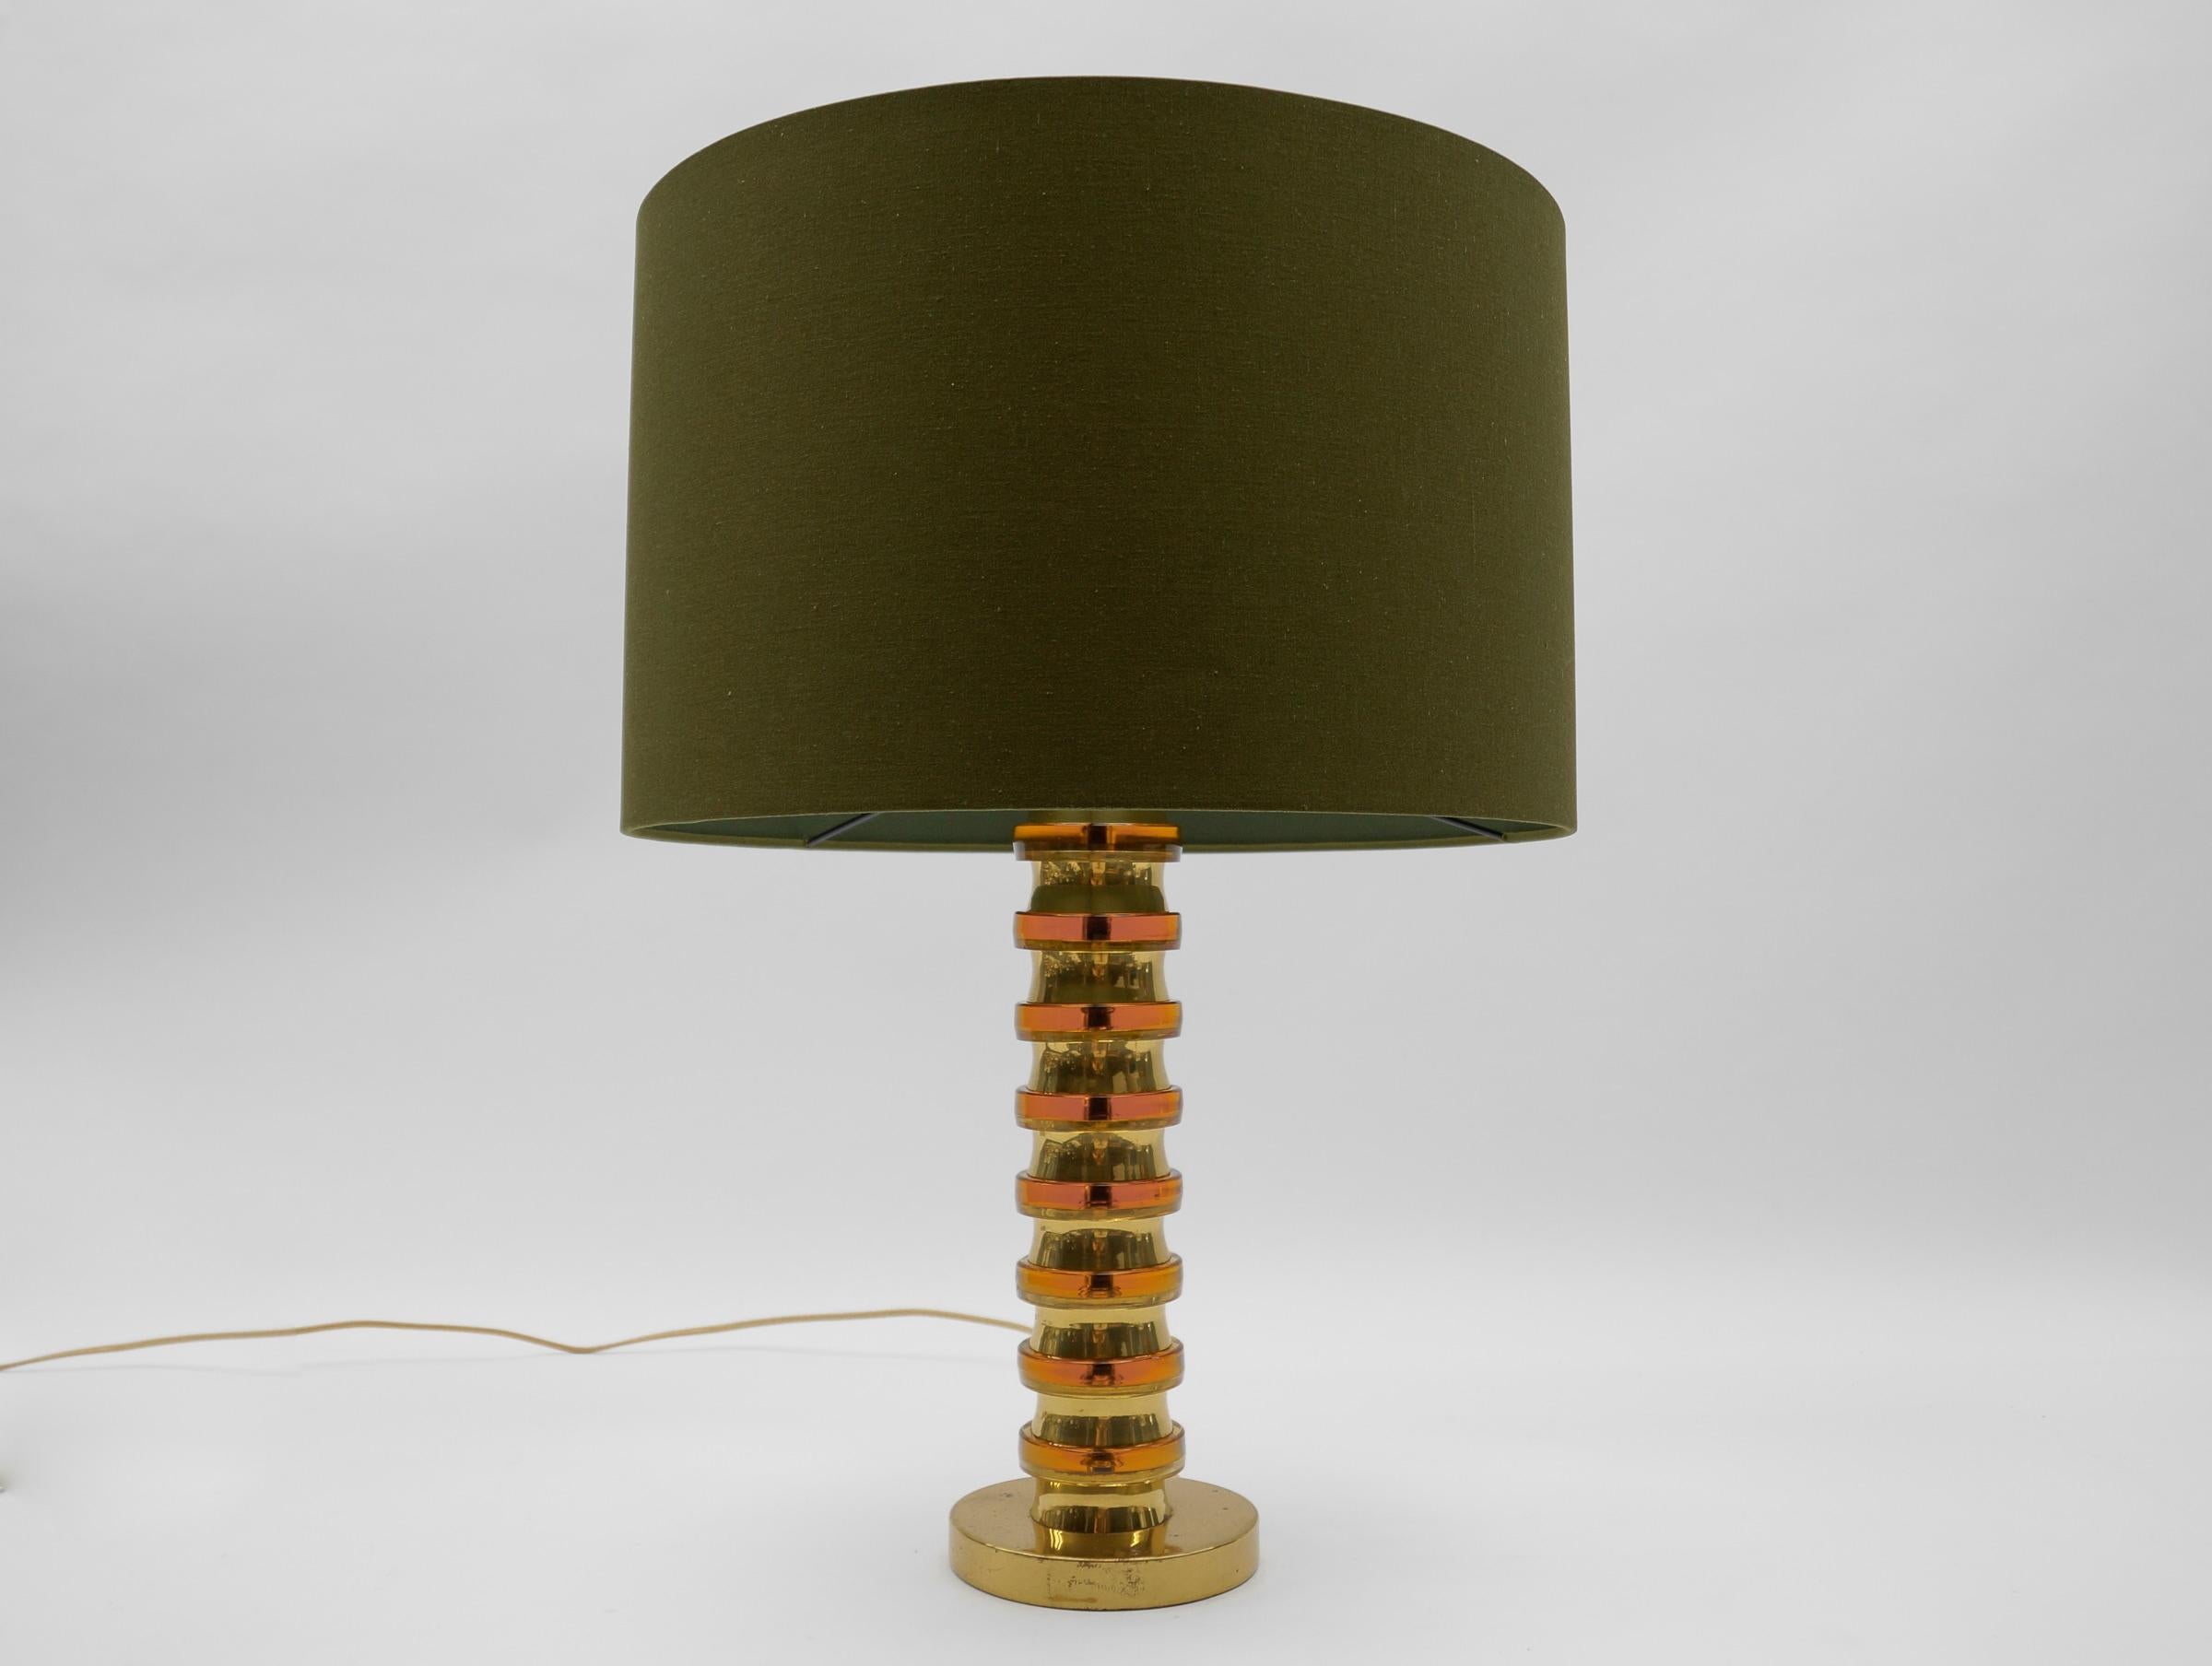 Mid Century Modern Gold Orange Swirls Table Lamp Base, 1960s Germany

The lampshade is to illustrate how the lamp base looks with a shade. The shade has a diameter of 17.71 in. (45 cm) and height 11.41 in. (29 cm).

One E27 socket. Works with 220V